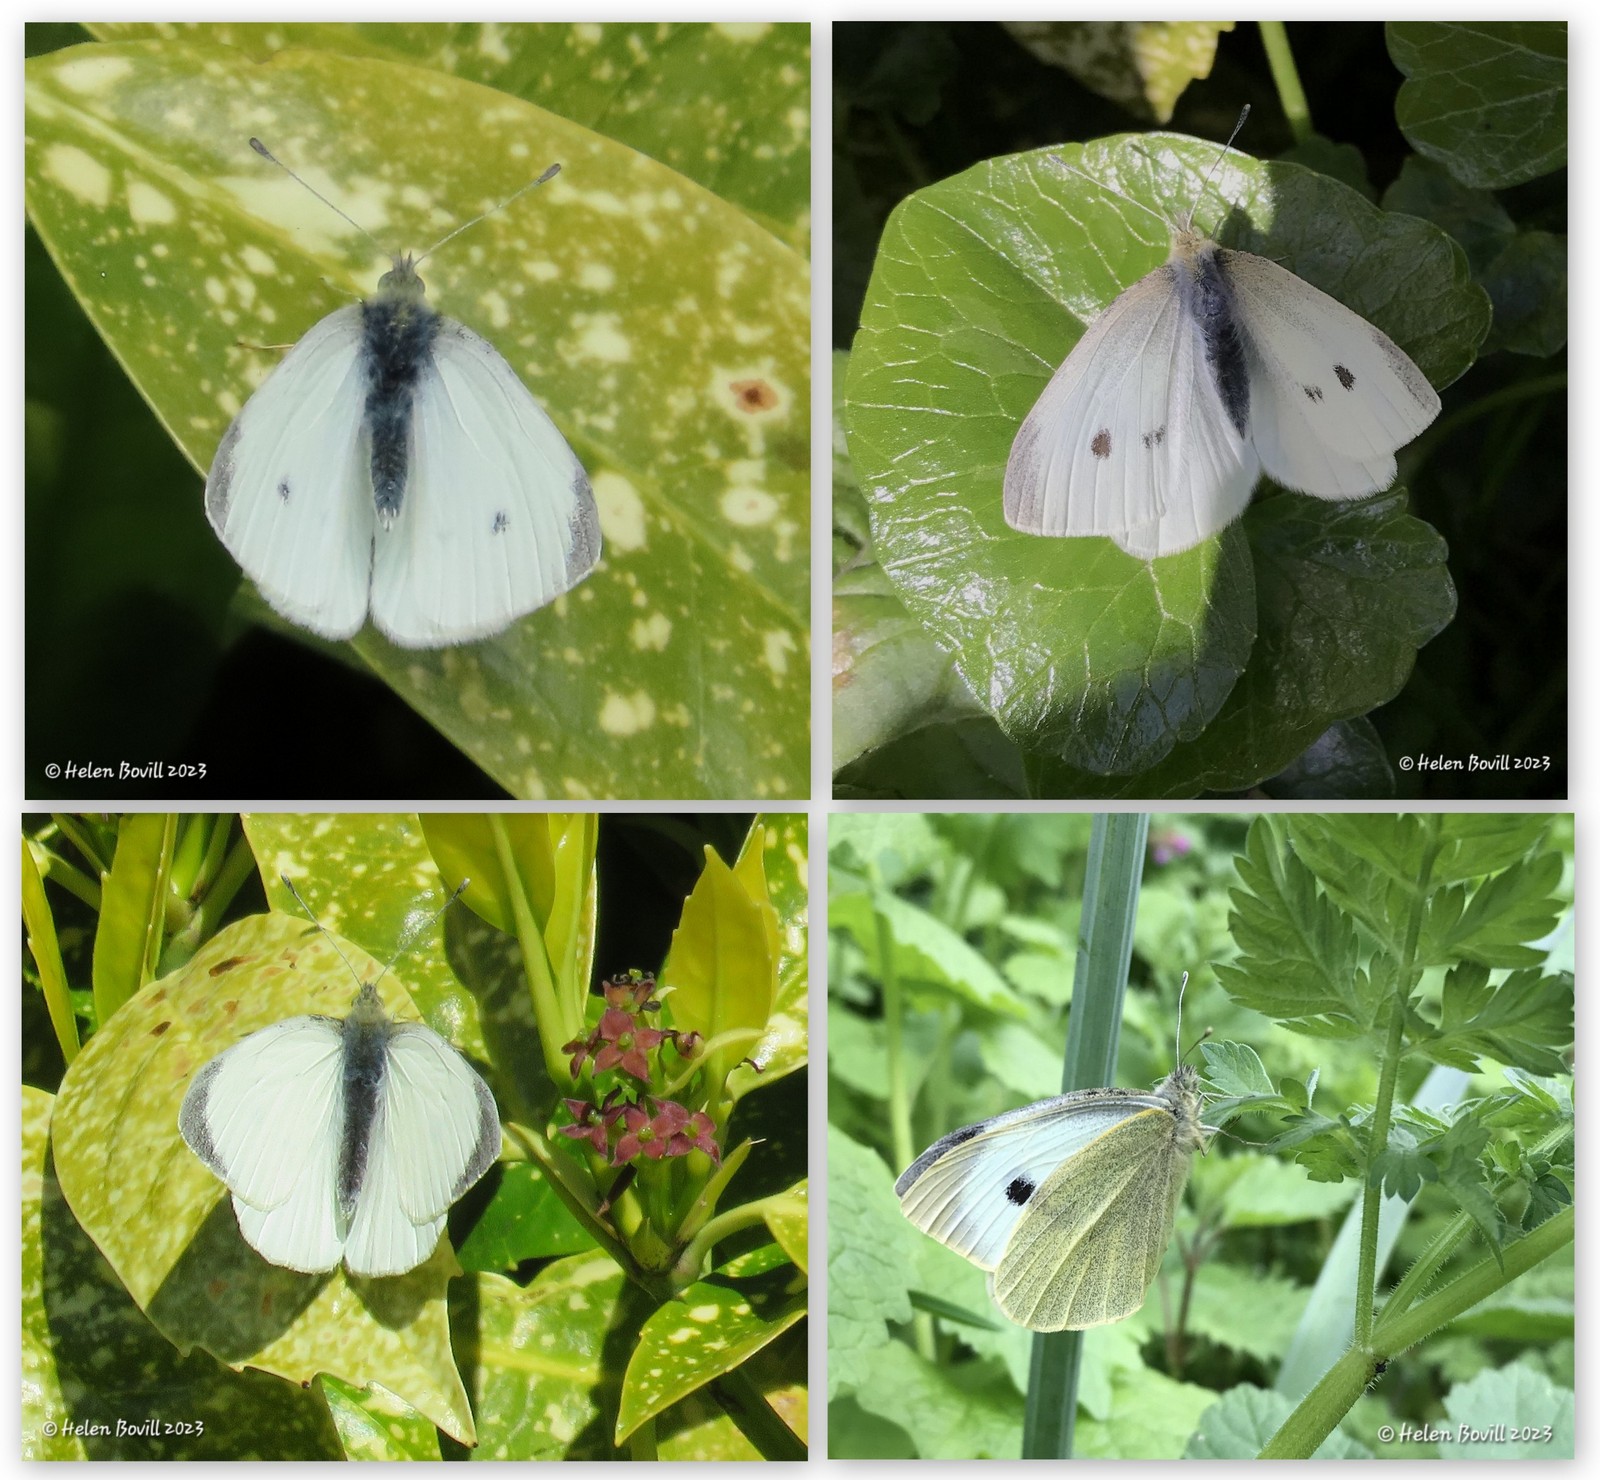 Cemetery wildlife collage showing a set of 4 photos showing the differences between male and female Small and Large White Butterflies